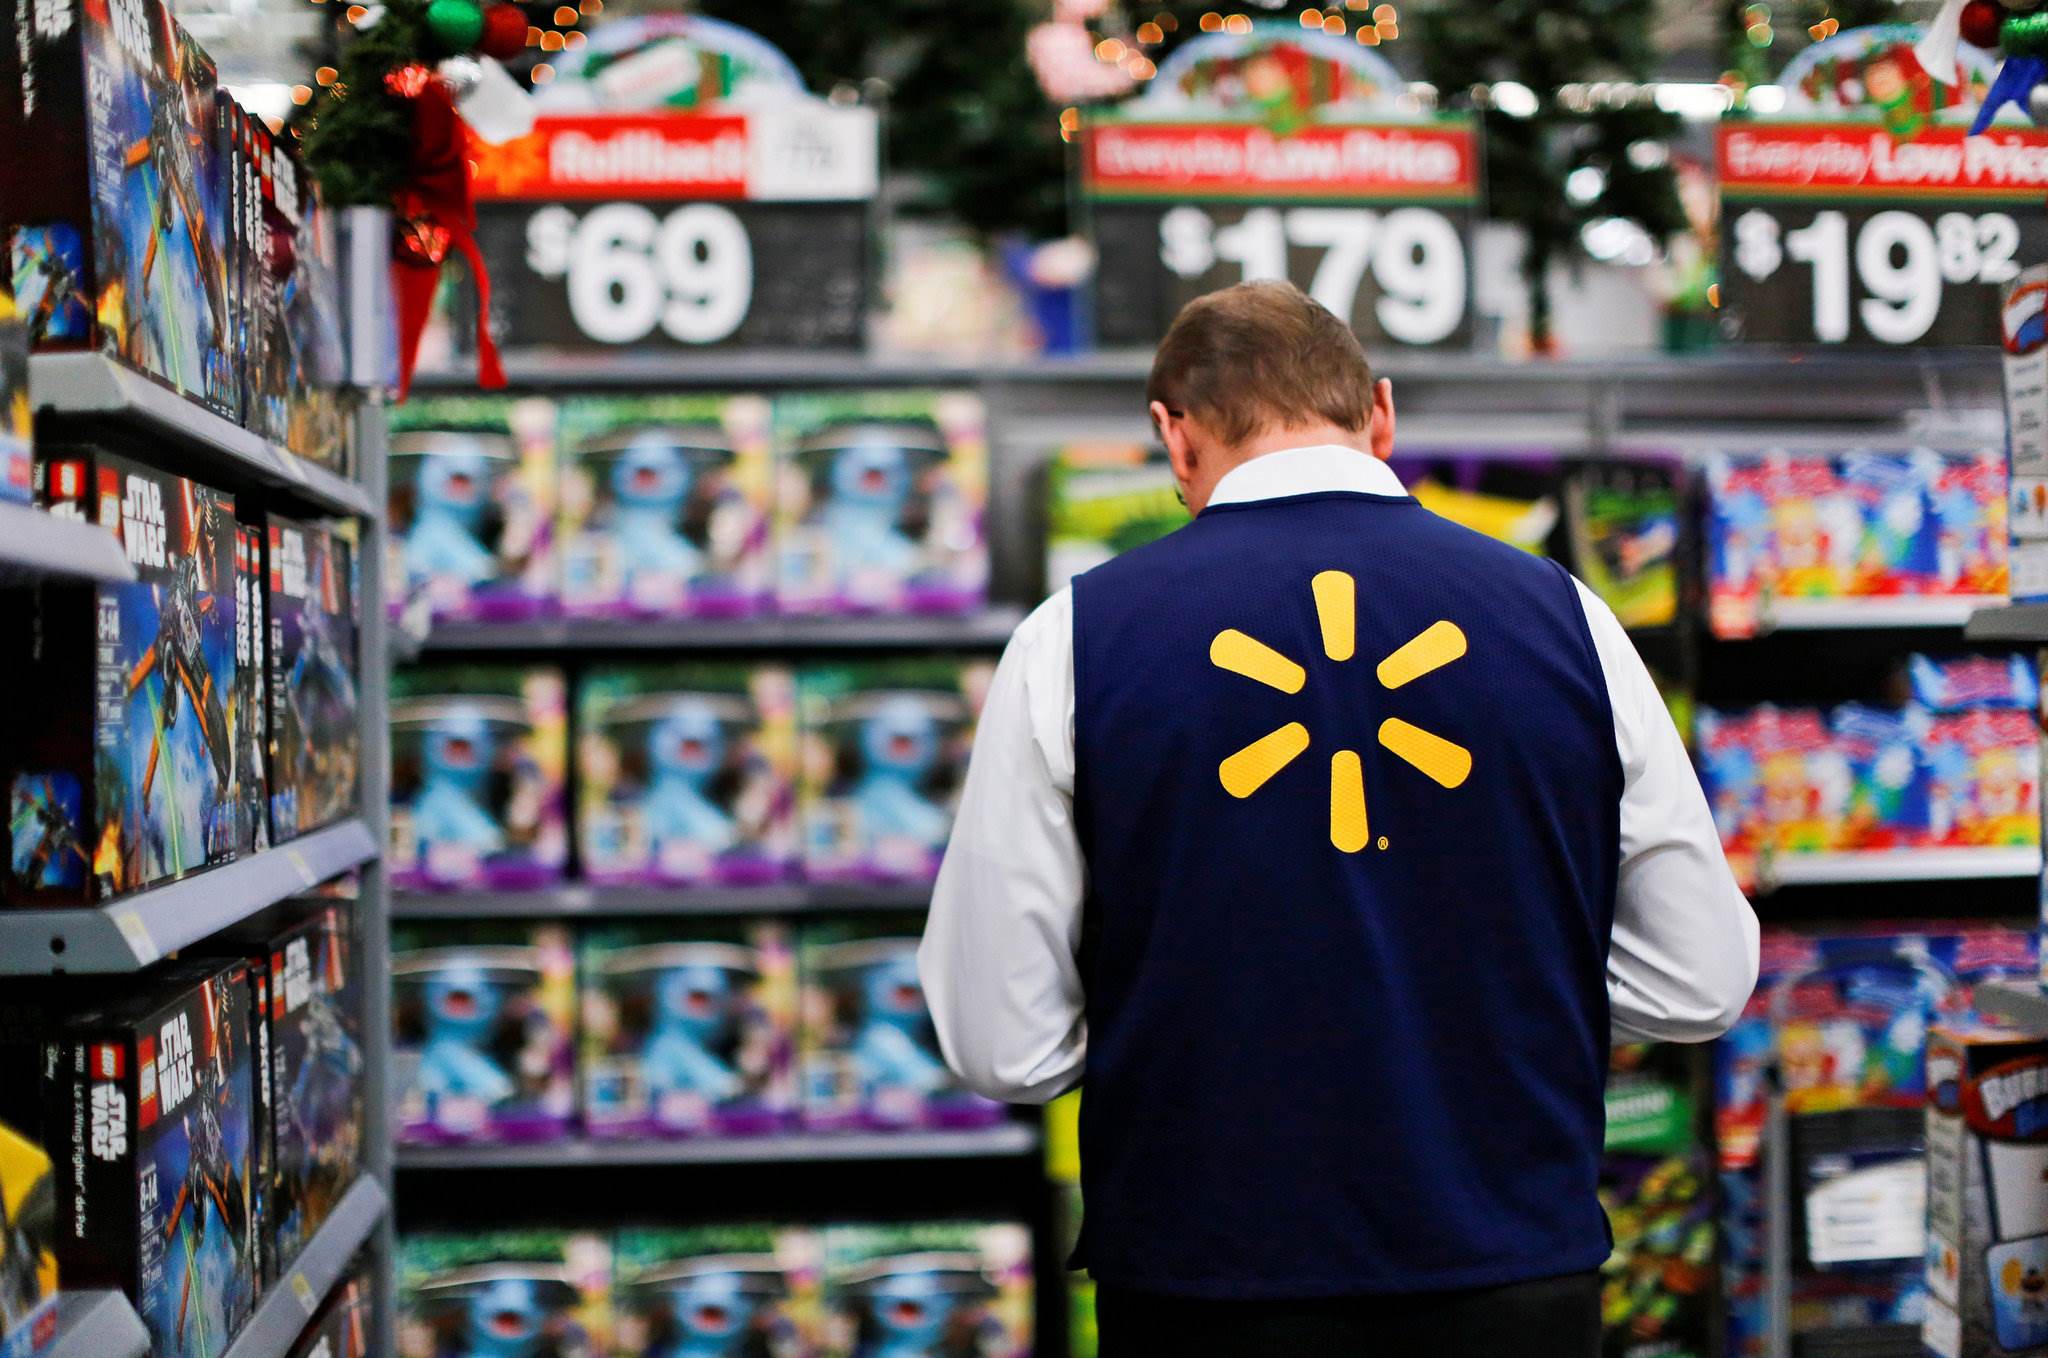 Discover The Secret Hours Of Walmart’s Overnight Shift!